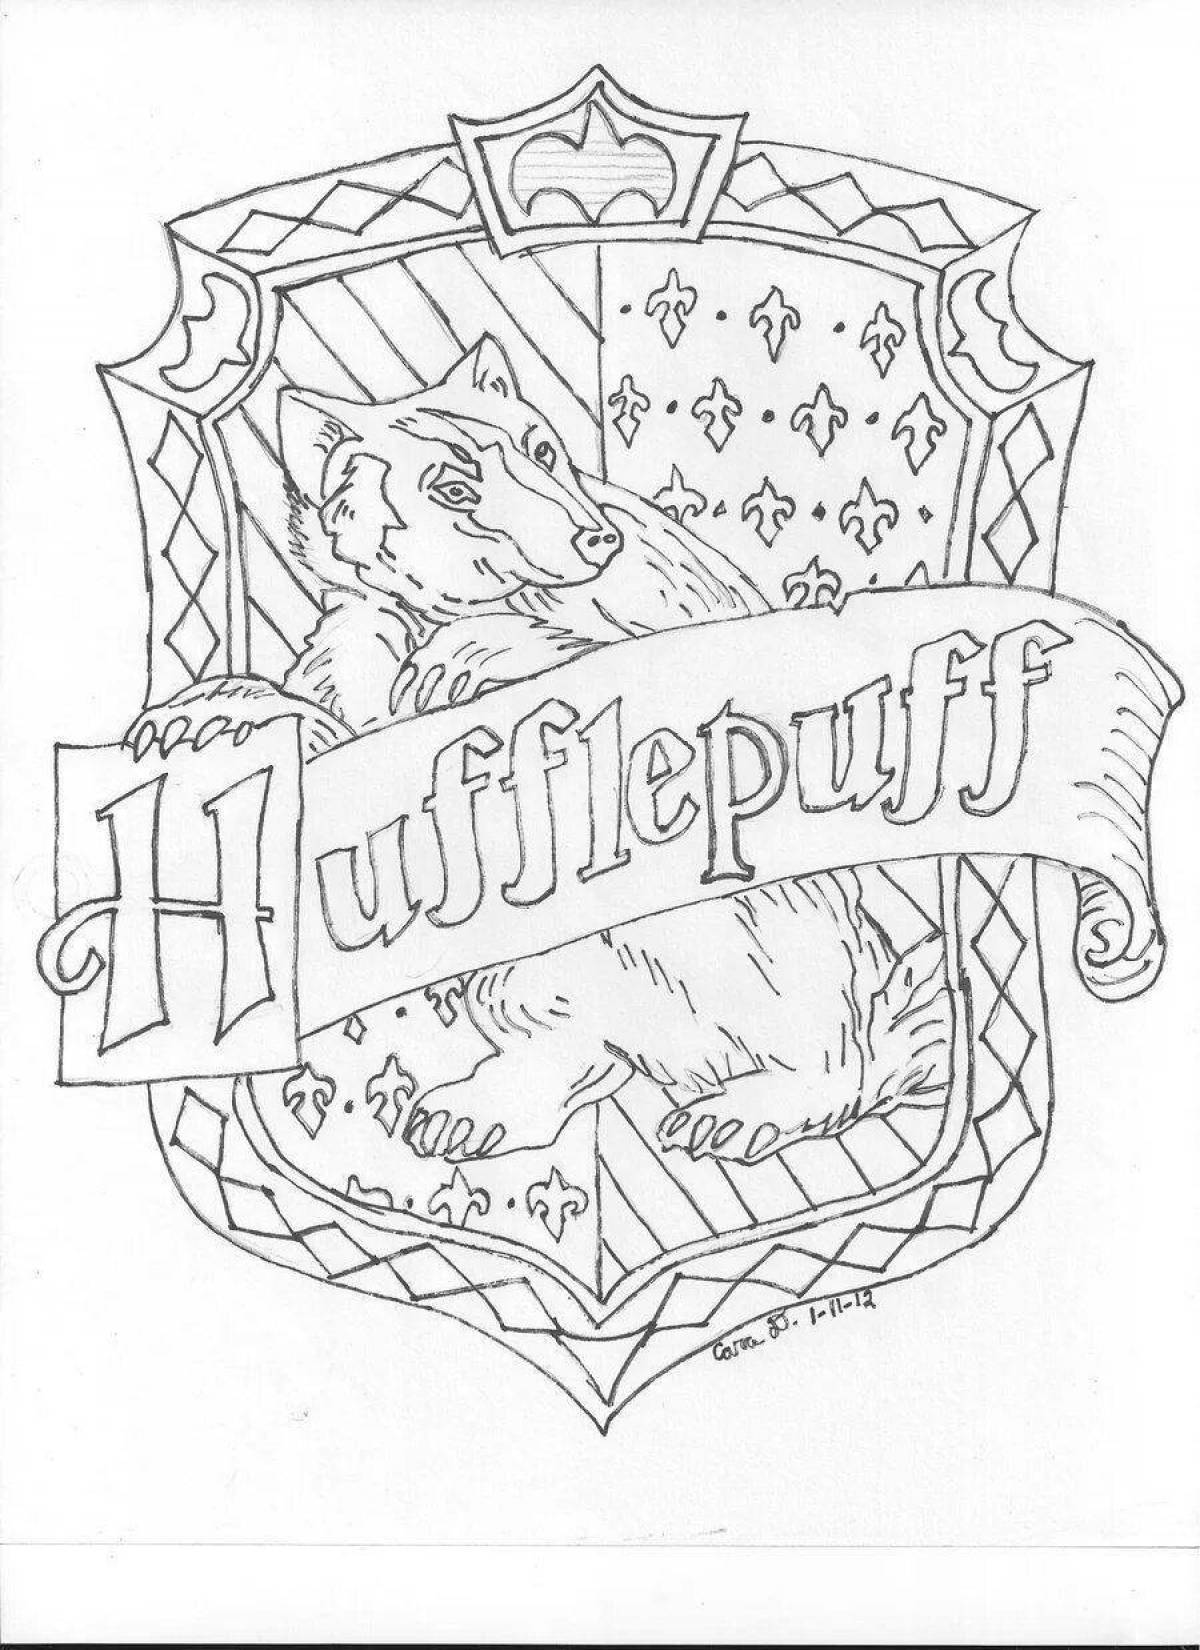 Exquisite slytherin coat of arms coloring page